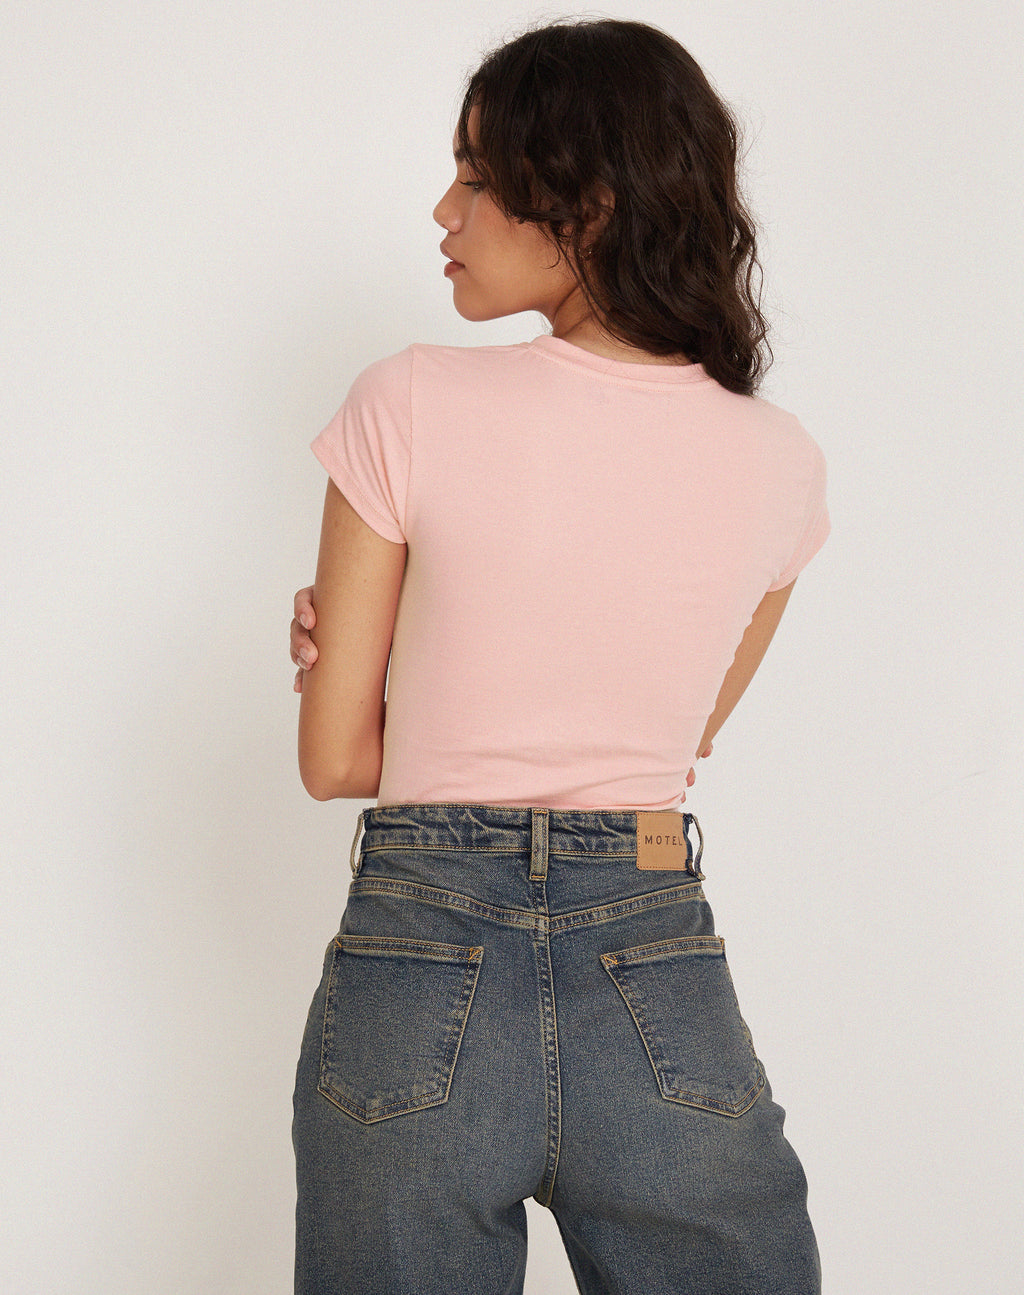 Tiona Cropped Tee in Peony Pink Bunny